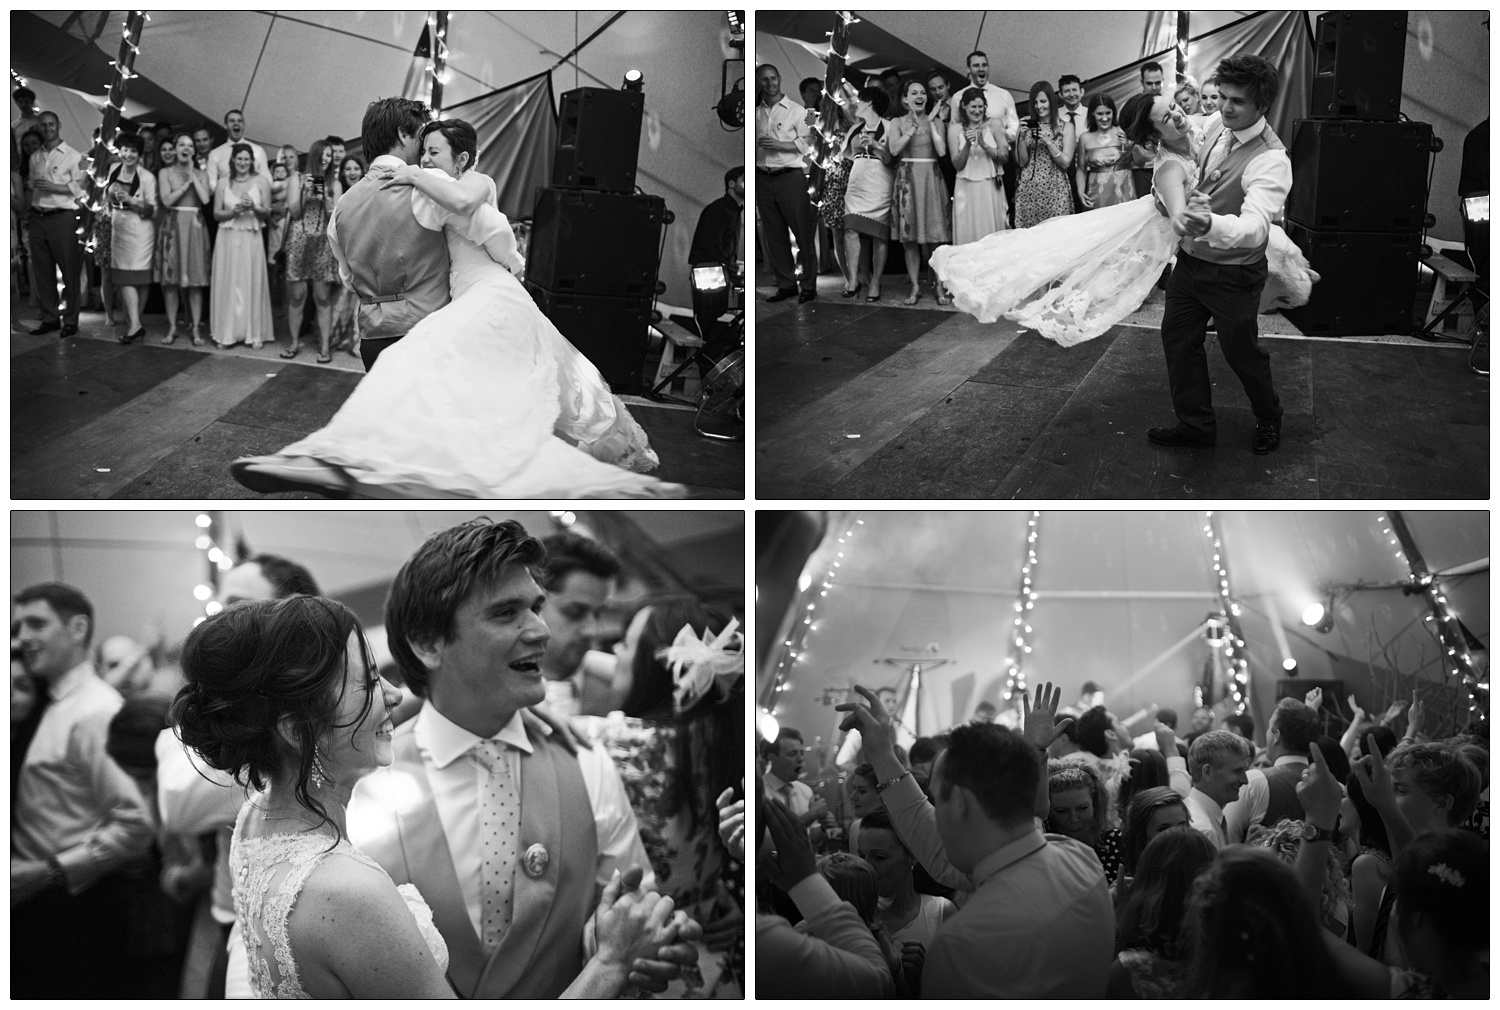 first dance at a farm wedding in a Tentipi. The groom spins the bride around.